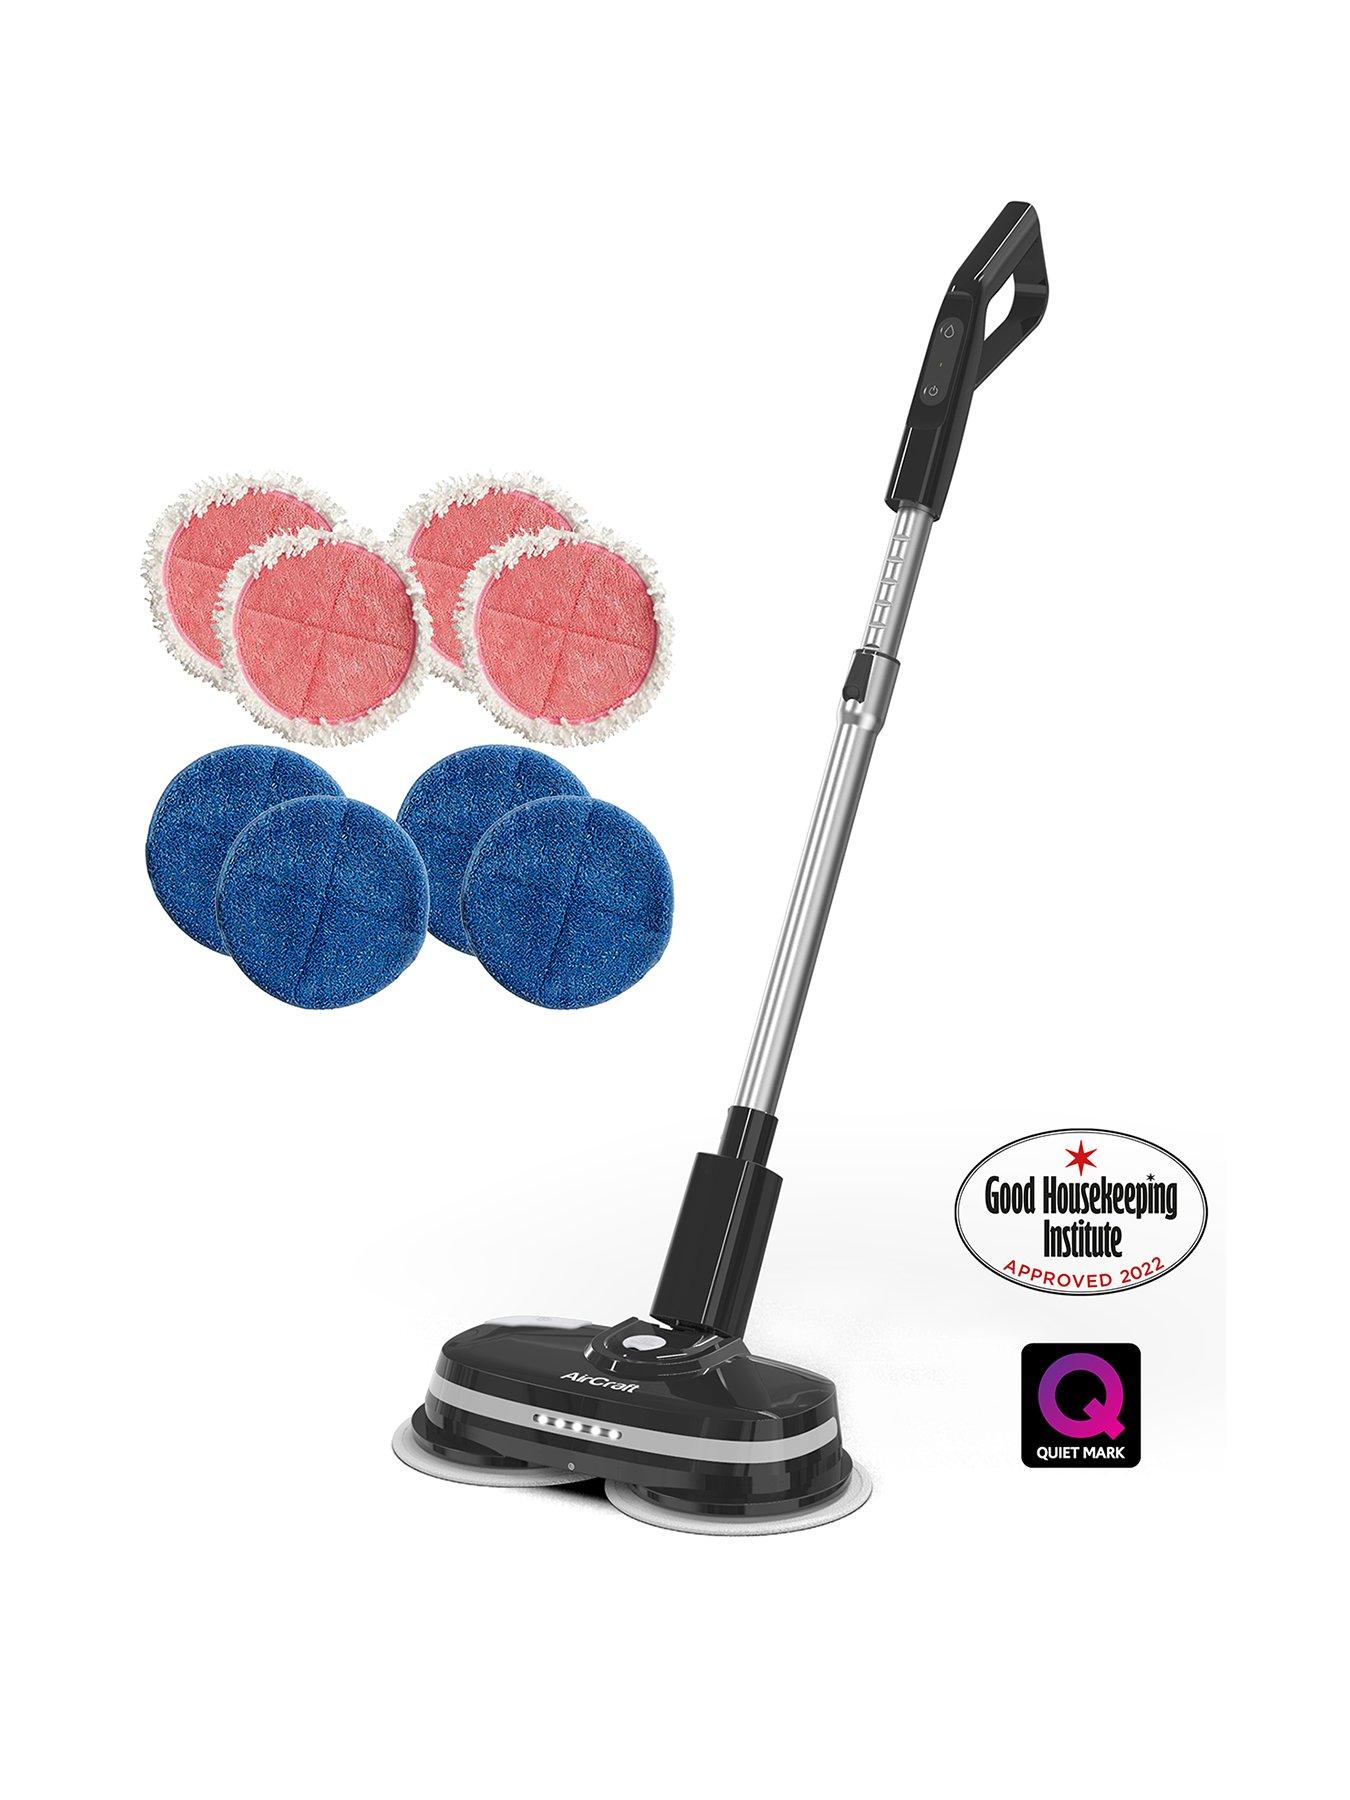 https://media.very.co.uk/i/very/QHFHH_SQ1_0000000088_NO_COLOR_SLf/aircraft-powerglide-cordless-hard-floor-cleaner-with-extra-pads-cleaning-and-buffering-around-20-square-metres-pernbspminute.jpg?$180x240_retinamobilex2$&$roundel_very$&p1_img=quiet_mark